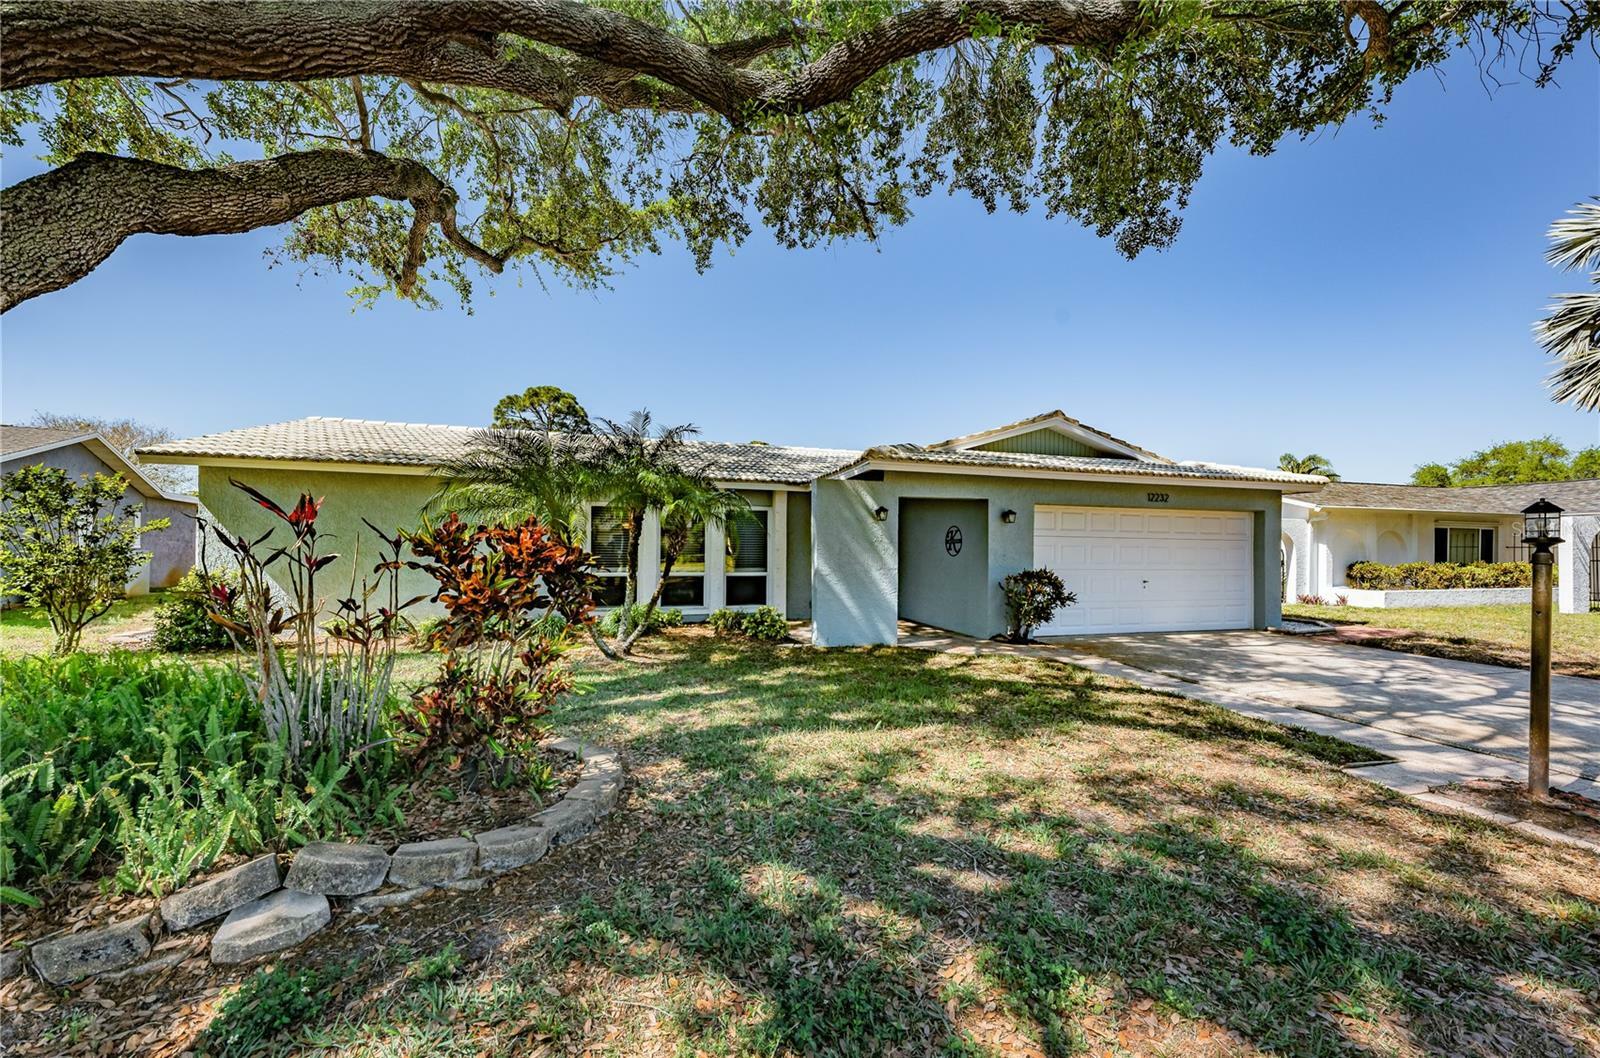 Property Photo:  12232 Imperial Drive  FL 33772 